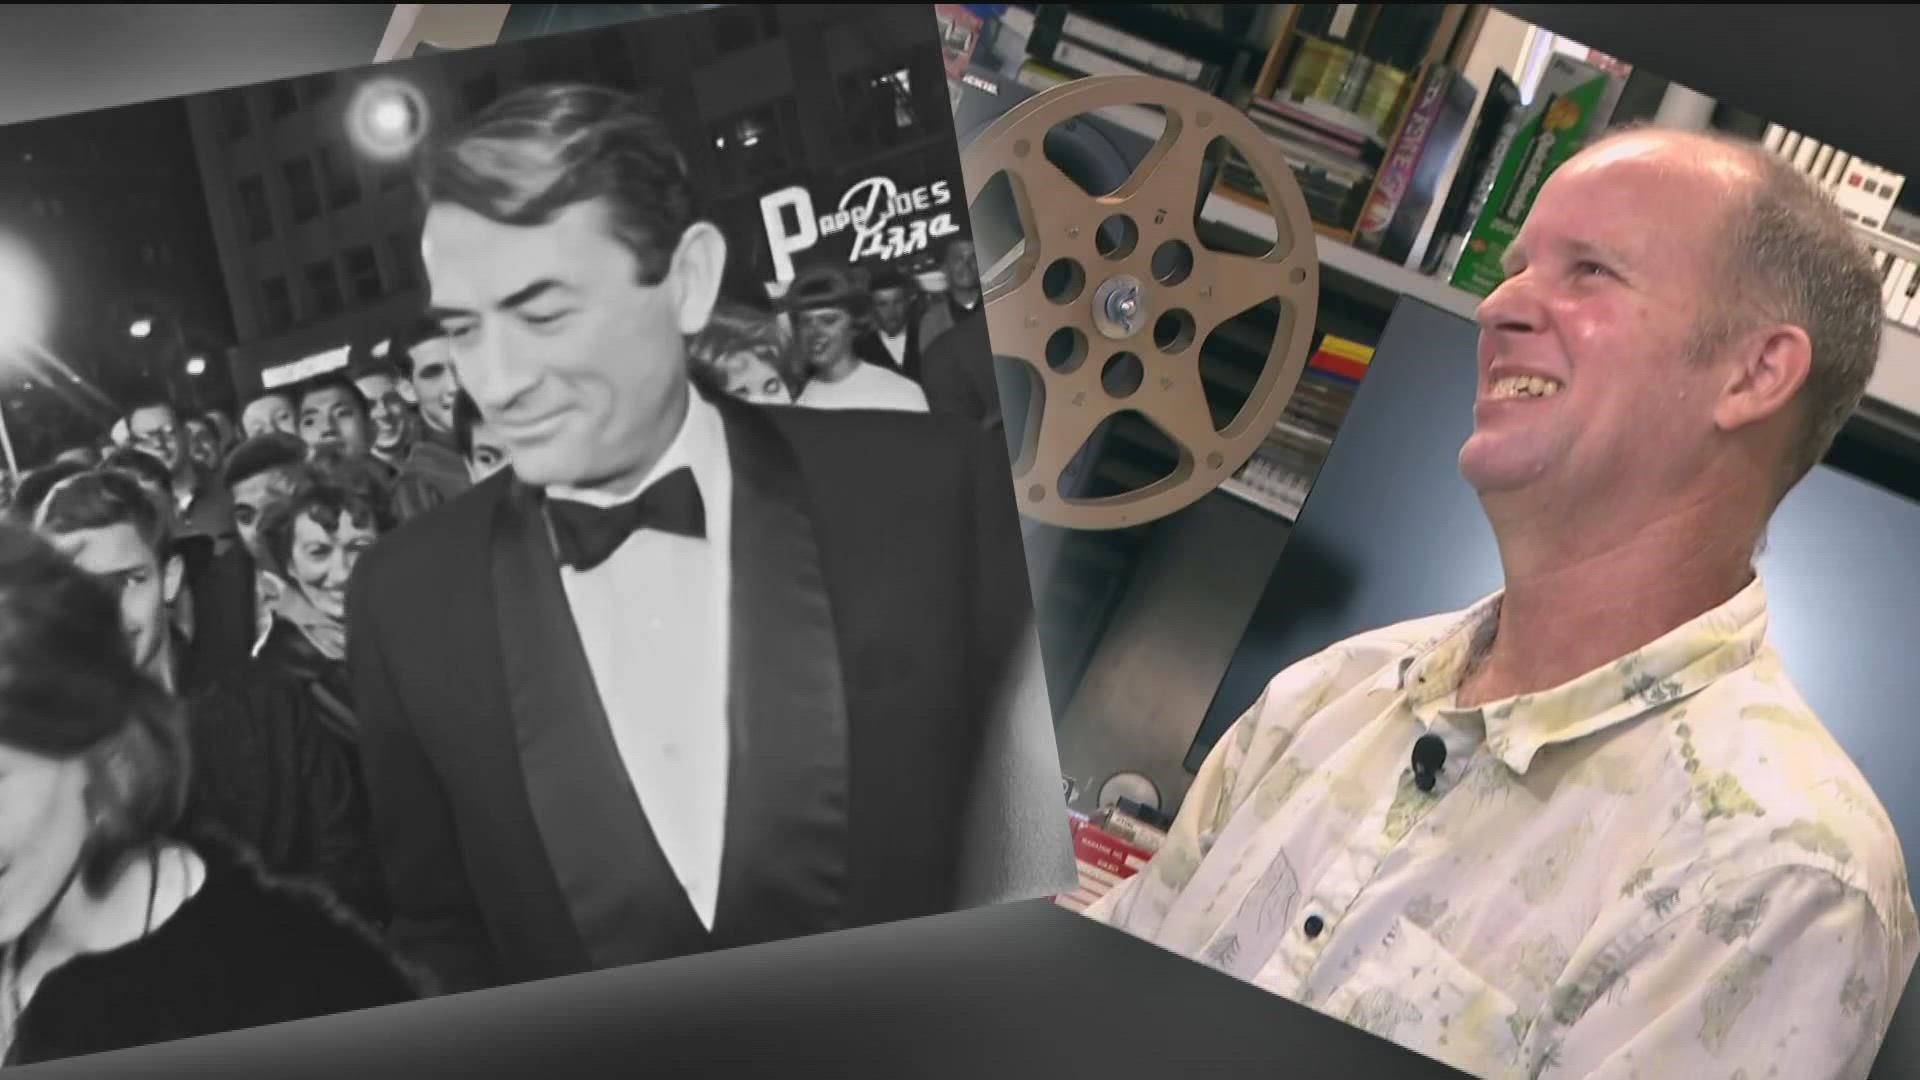 Academy Award winning actor's interview from "To Kill a Mockingbird" premiere unseen since 1963.